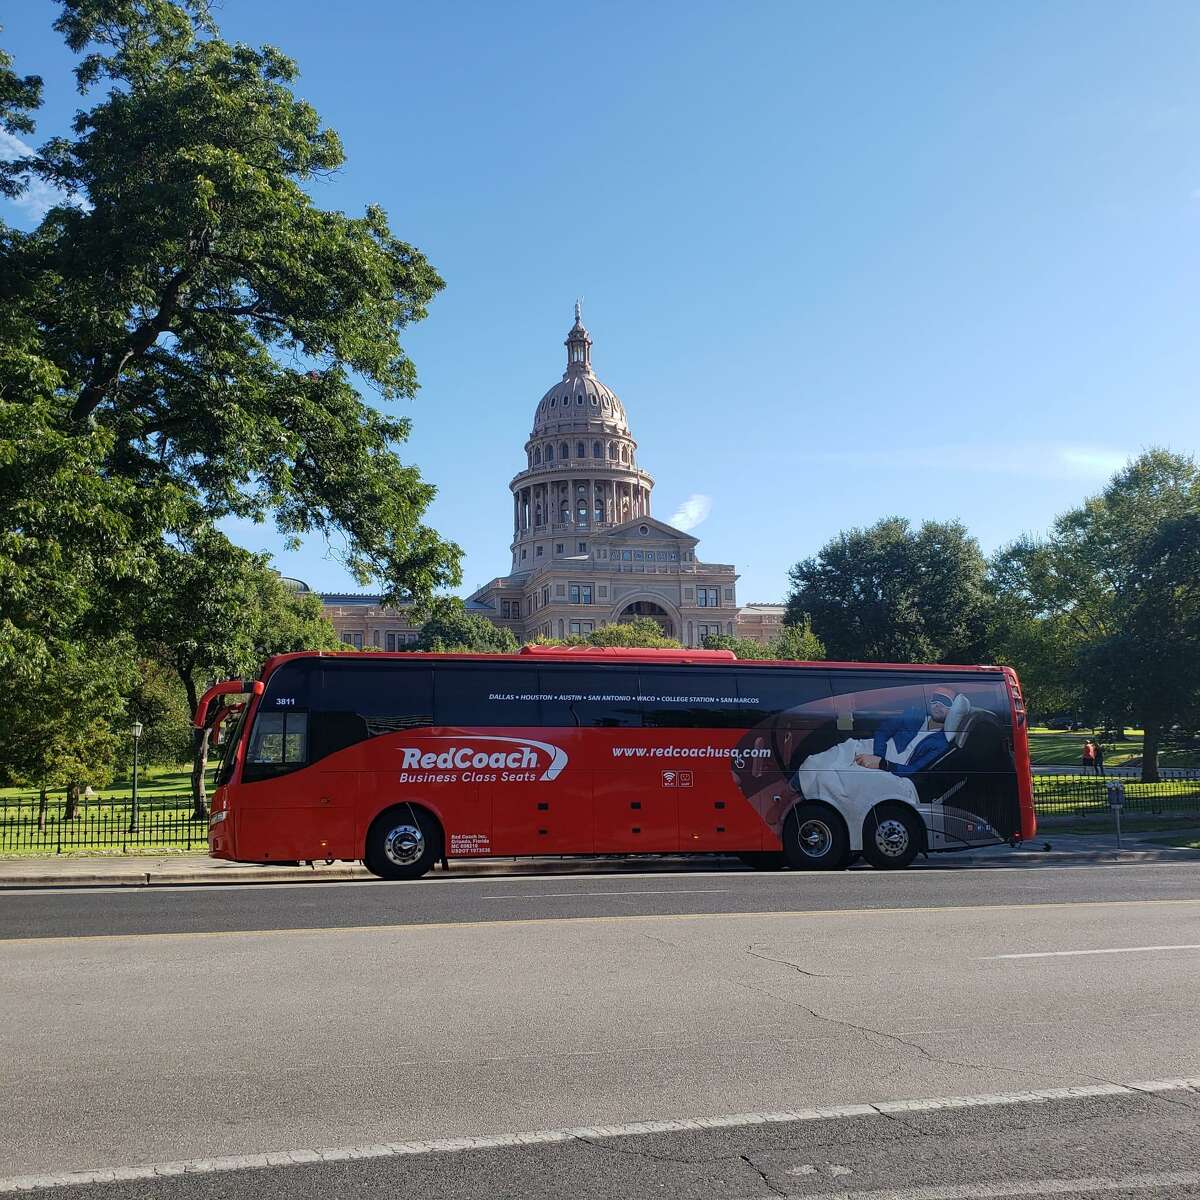 Florida-based bus line RedCoach is expanding into Texas, starting service on Oct. 18 between Houston, Dallas, Austin, College Station and Waco. The 26-seat buses feature larger seats than low-cost lines that can recline for sleeping.